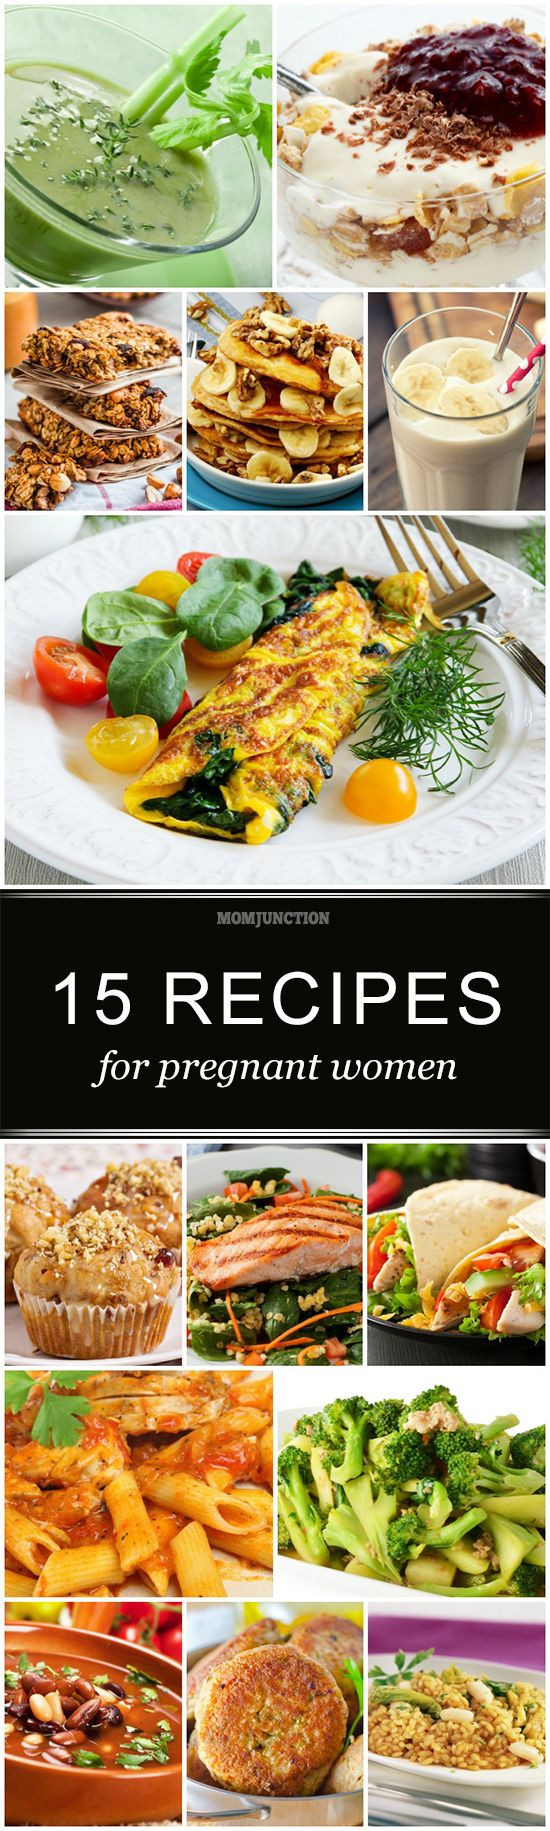 Healthy Pregnancy Lunches
 Top 15 Healthy Recipes For Pregnant Women